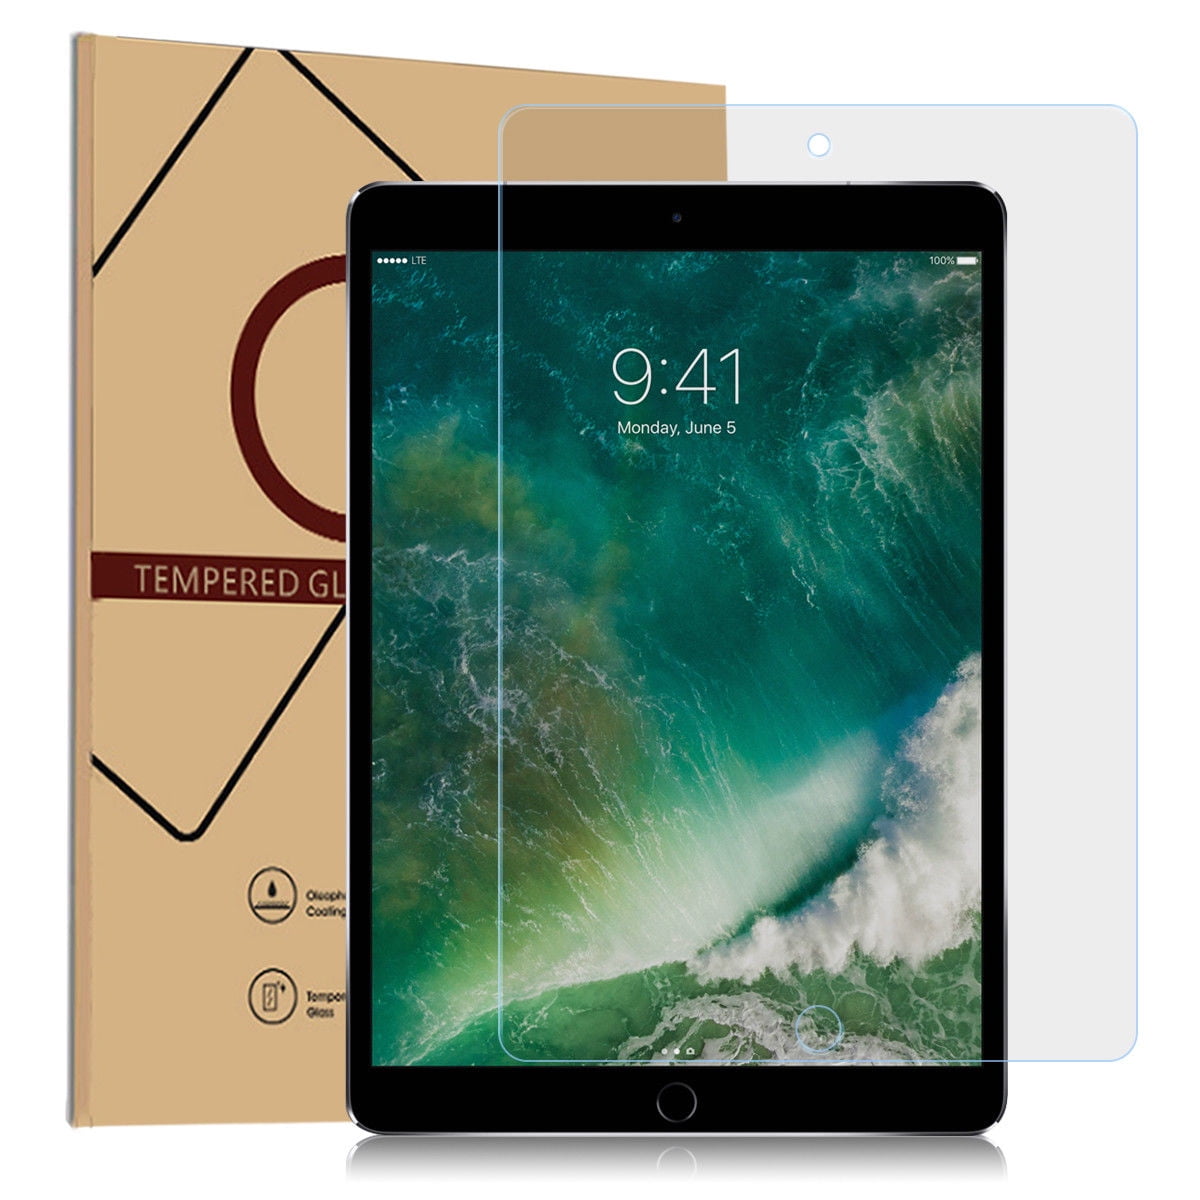 iPad Premium Tempered Glass Screen Protectors for iPad Air 2 & Other Models 